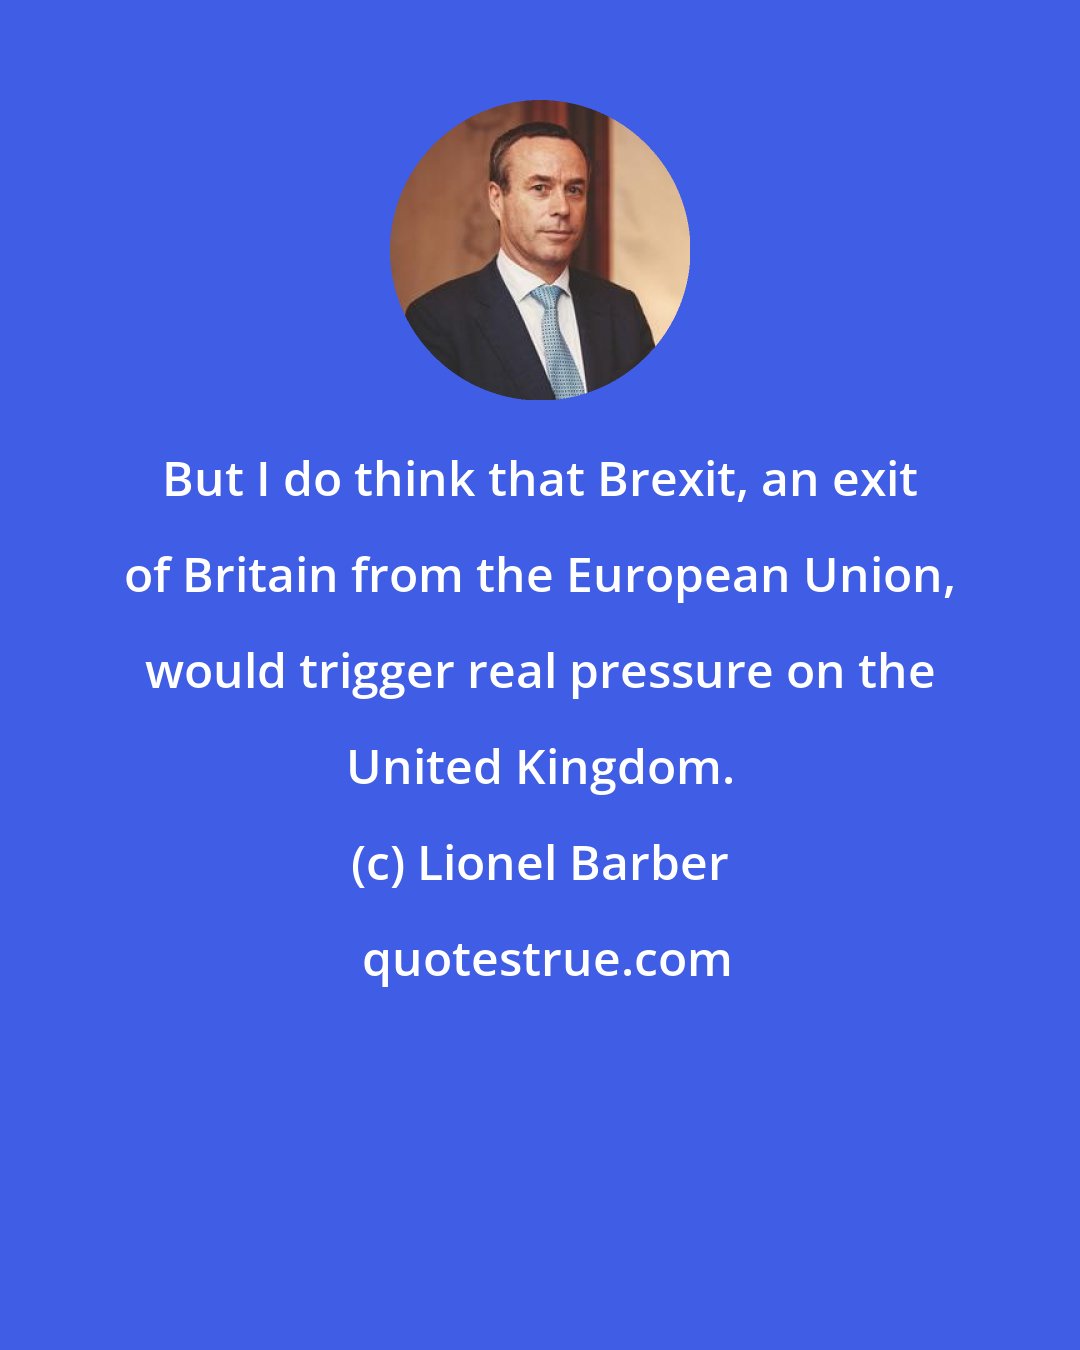 Lionel Barber: But I do think that Brexit, an exit of Britain from the European Union, would trigger real pressure on the United Kingdom.